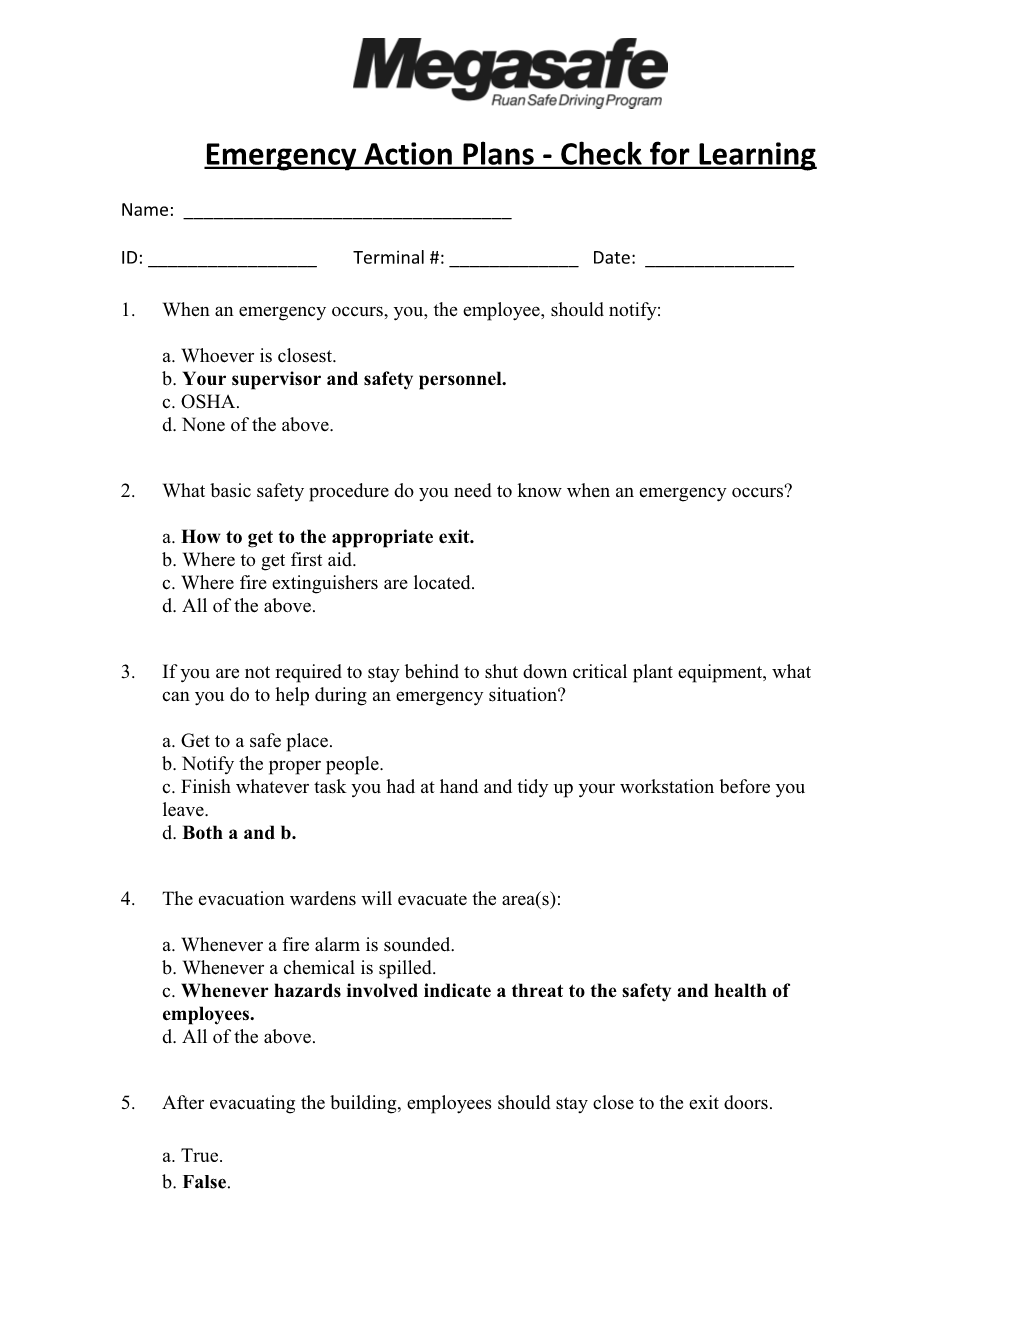 Emergency Action Plans - Check for Learning